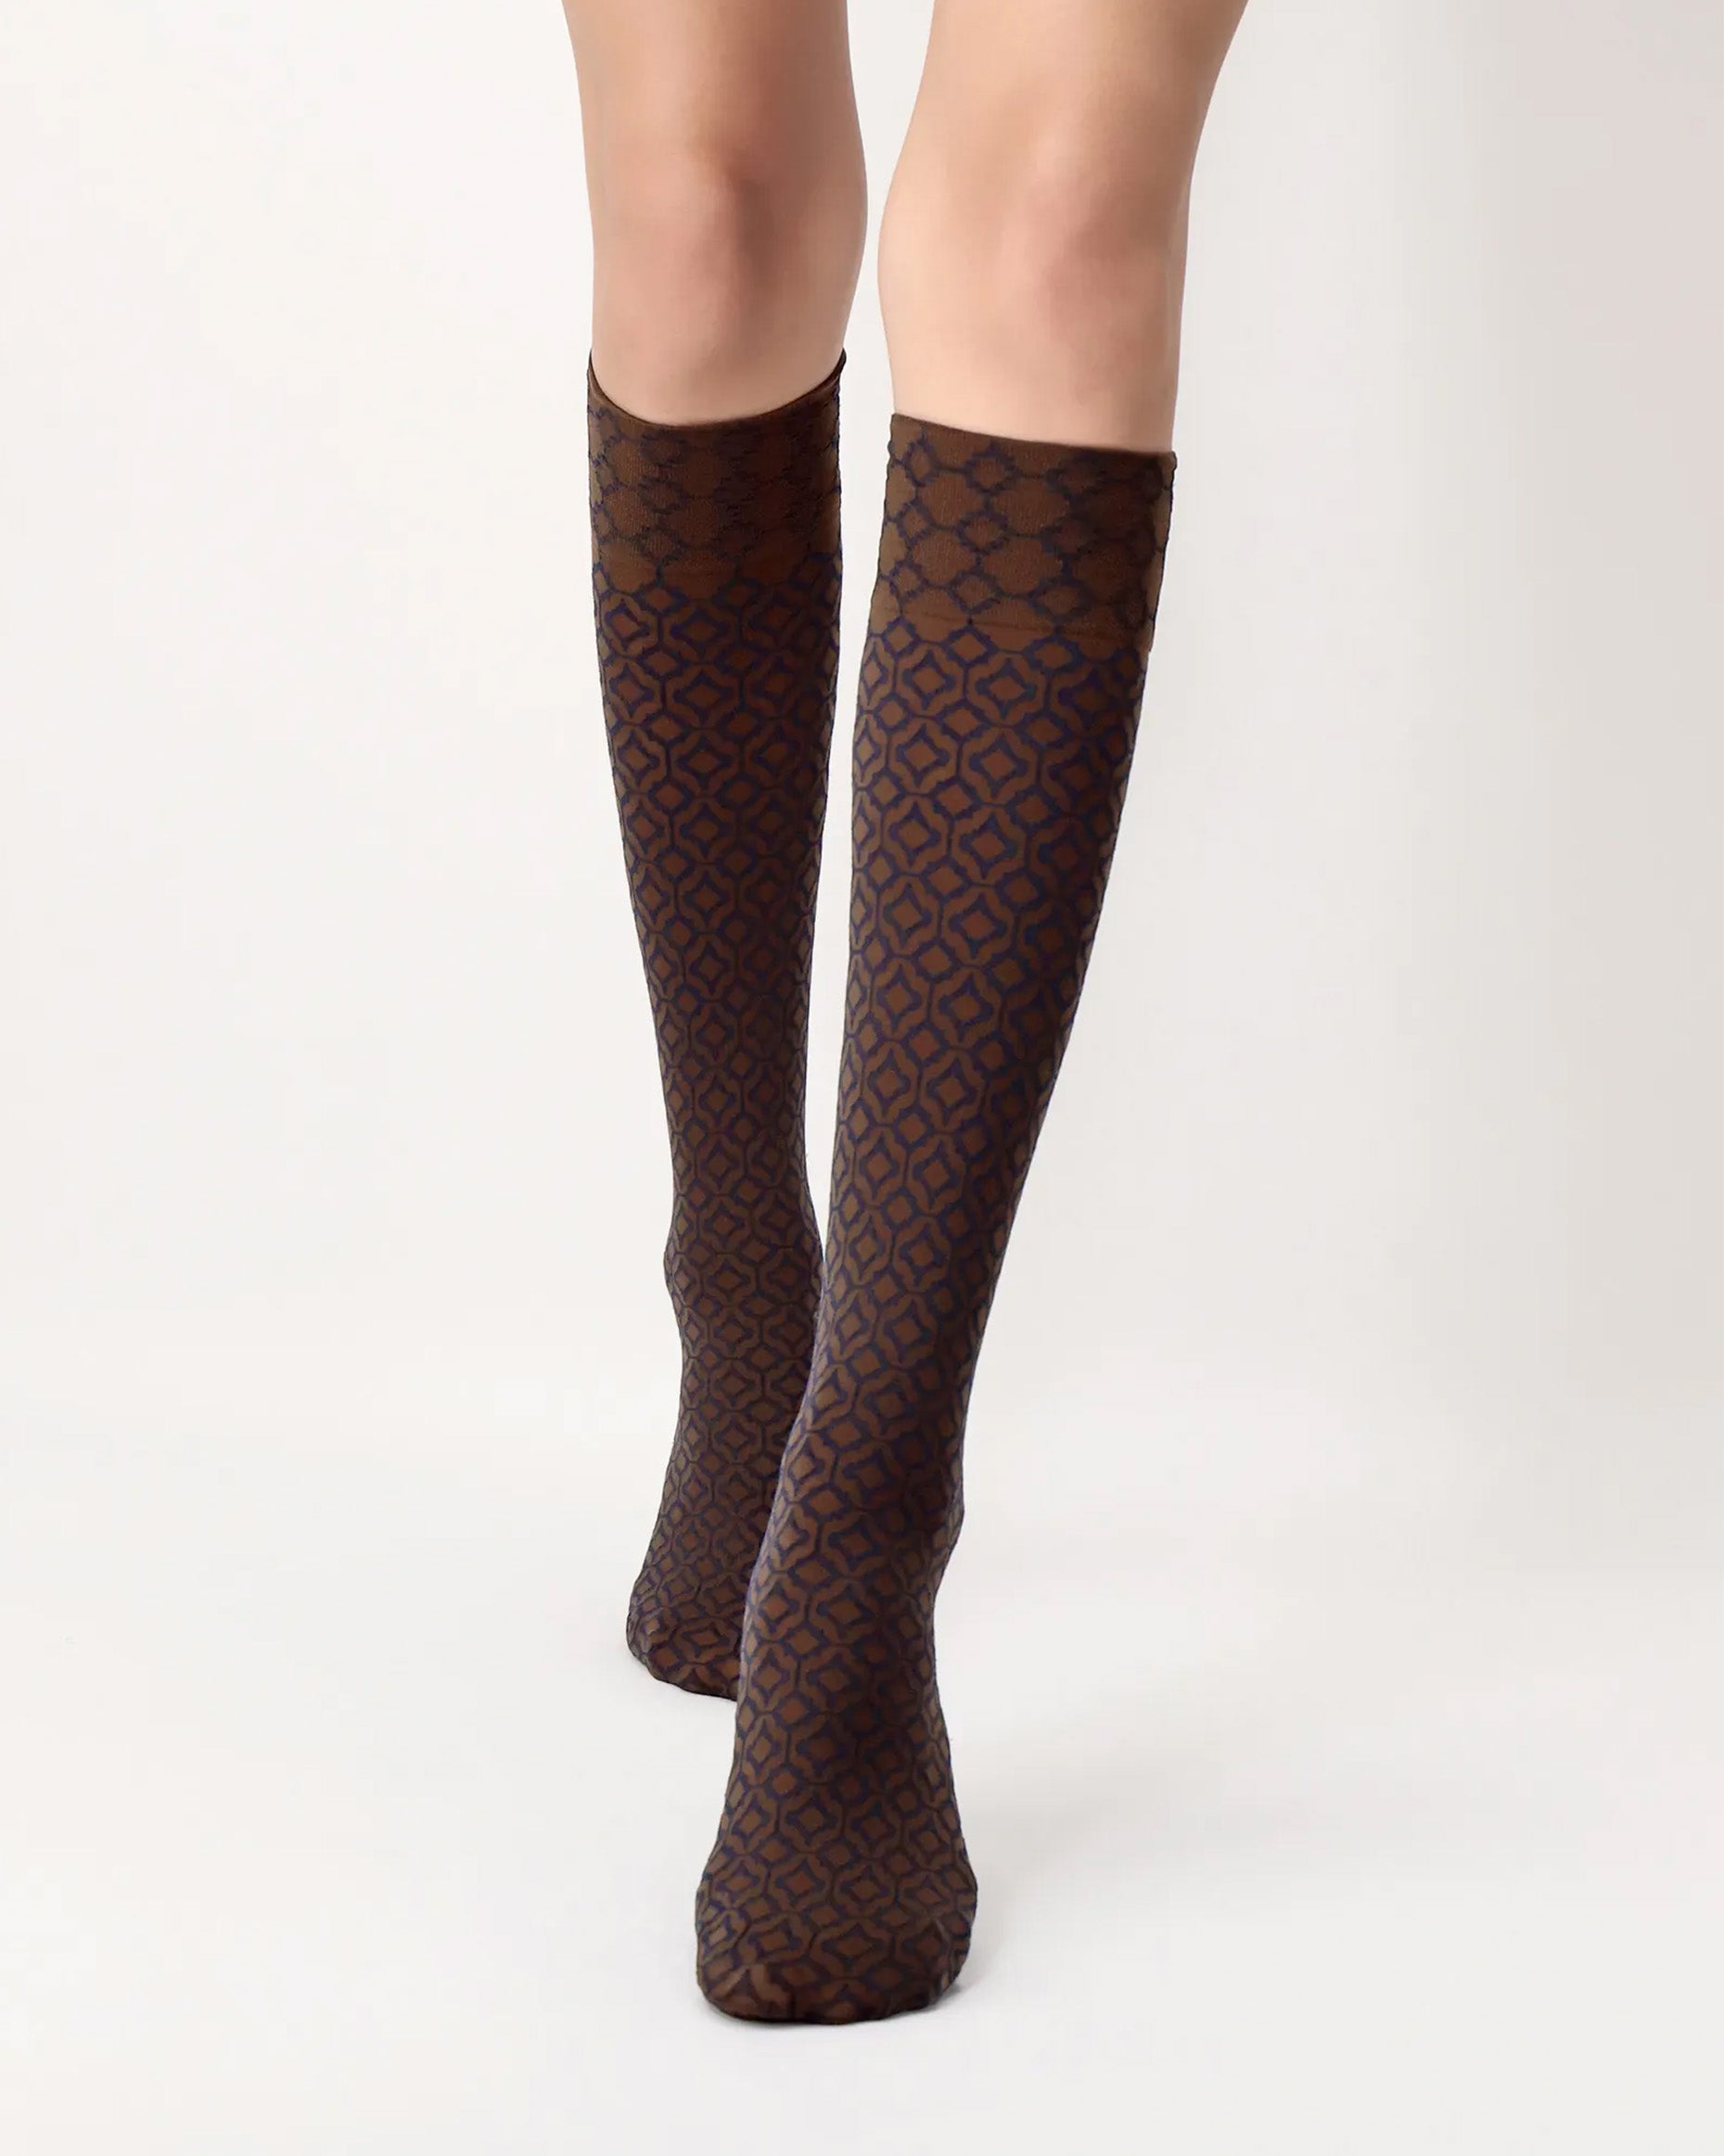 Oroblù I Love First Class Geomtric Knee-Highs - Brown opaque fashion knee-high socks with a geometric diamond style pattern in navy